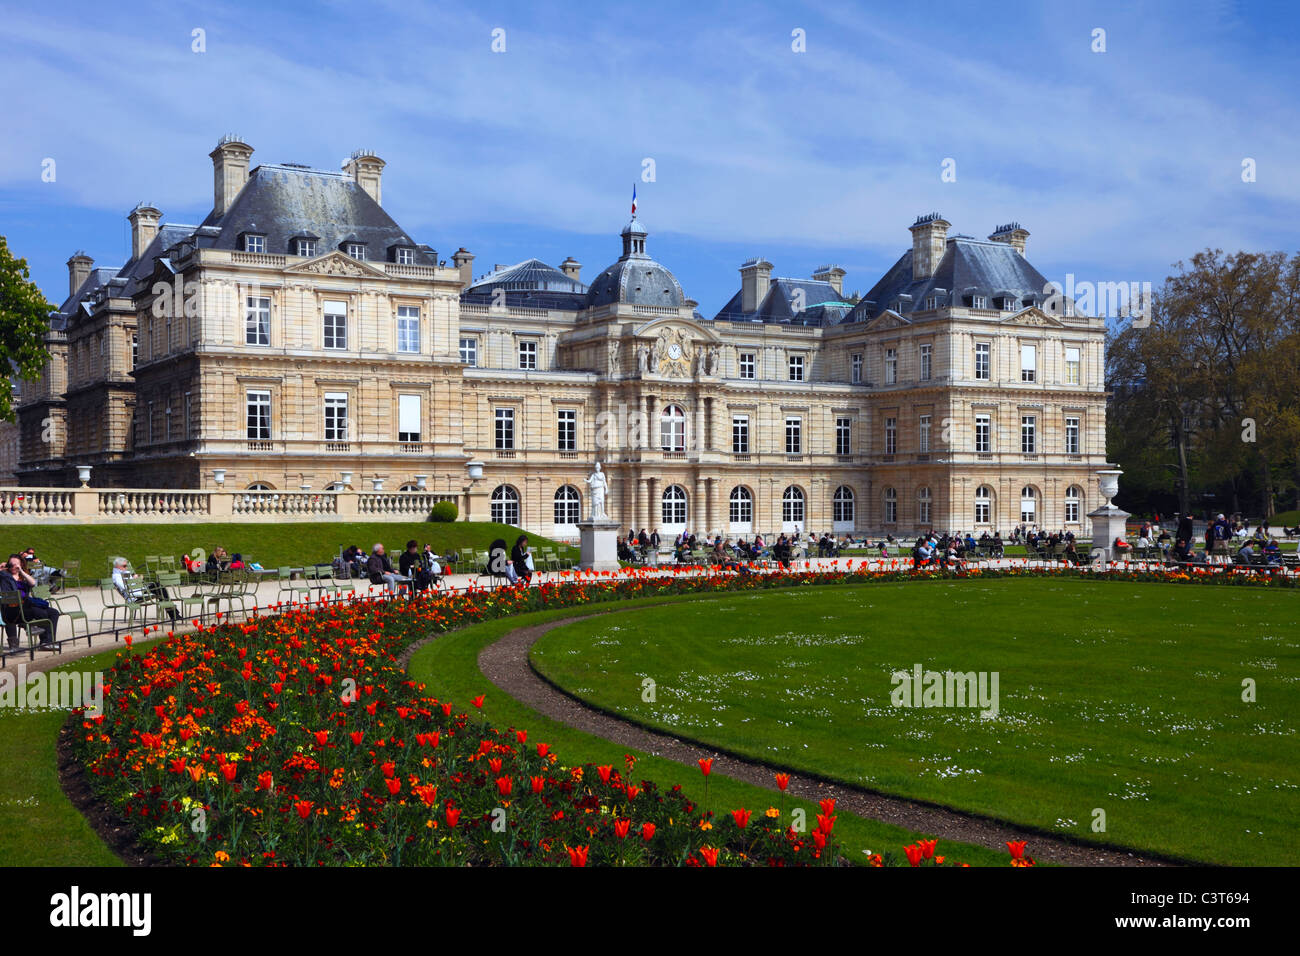 Luxembourg Palace, which is the seat of French senate.Paris, France. Stock Photo